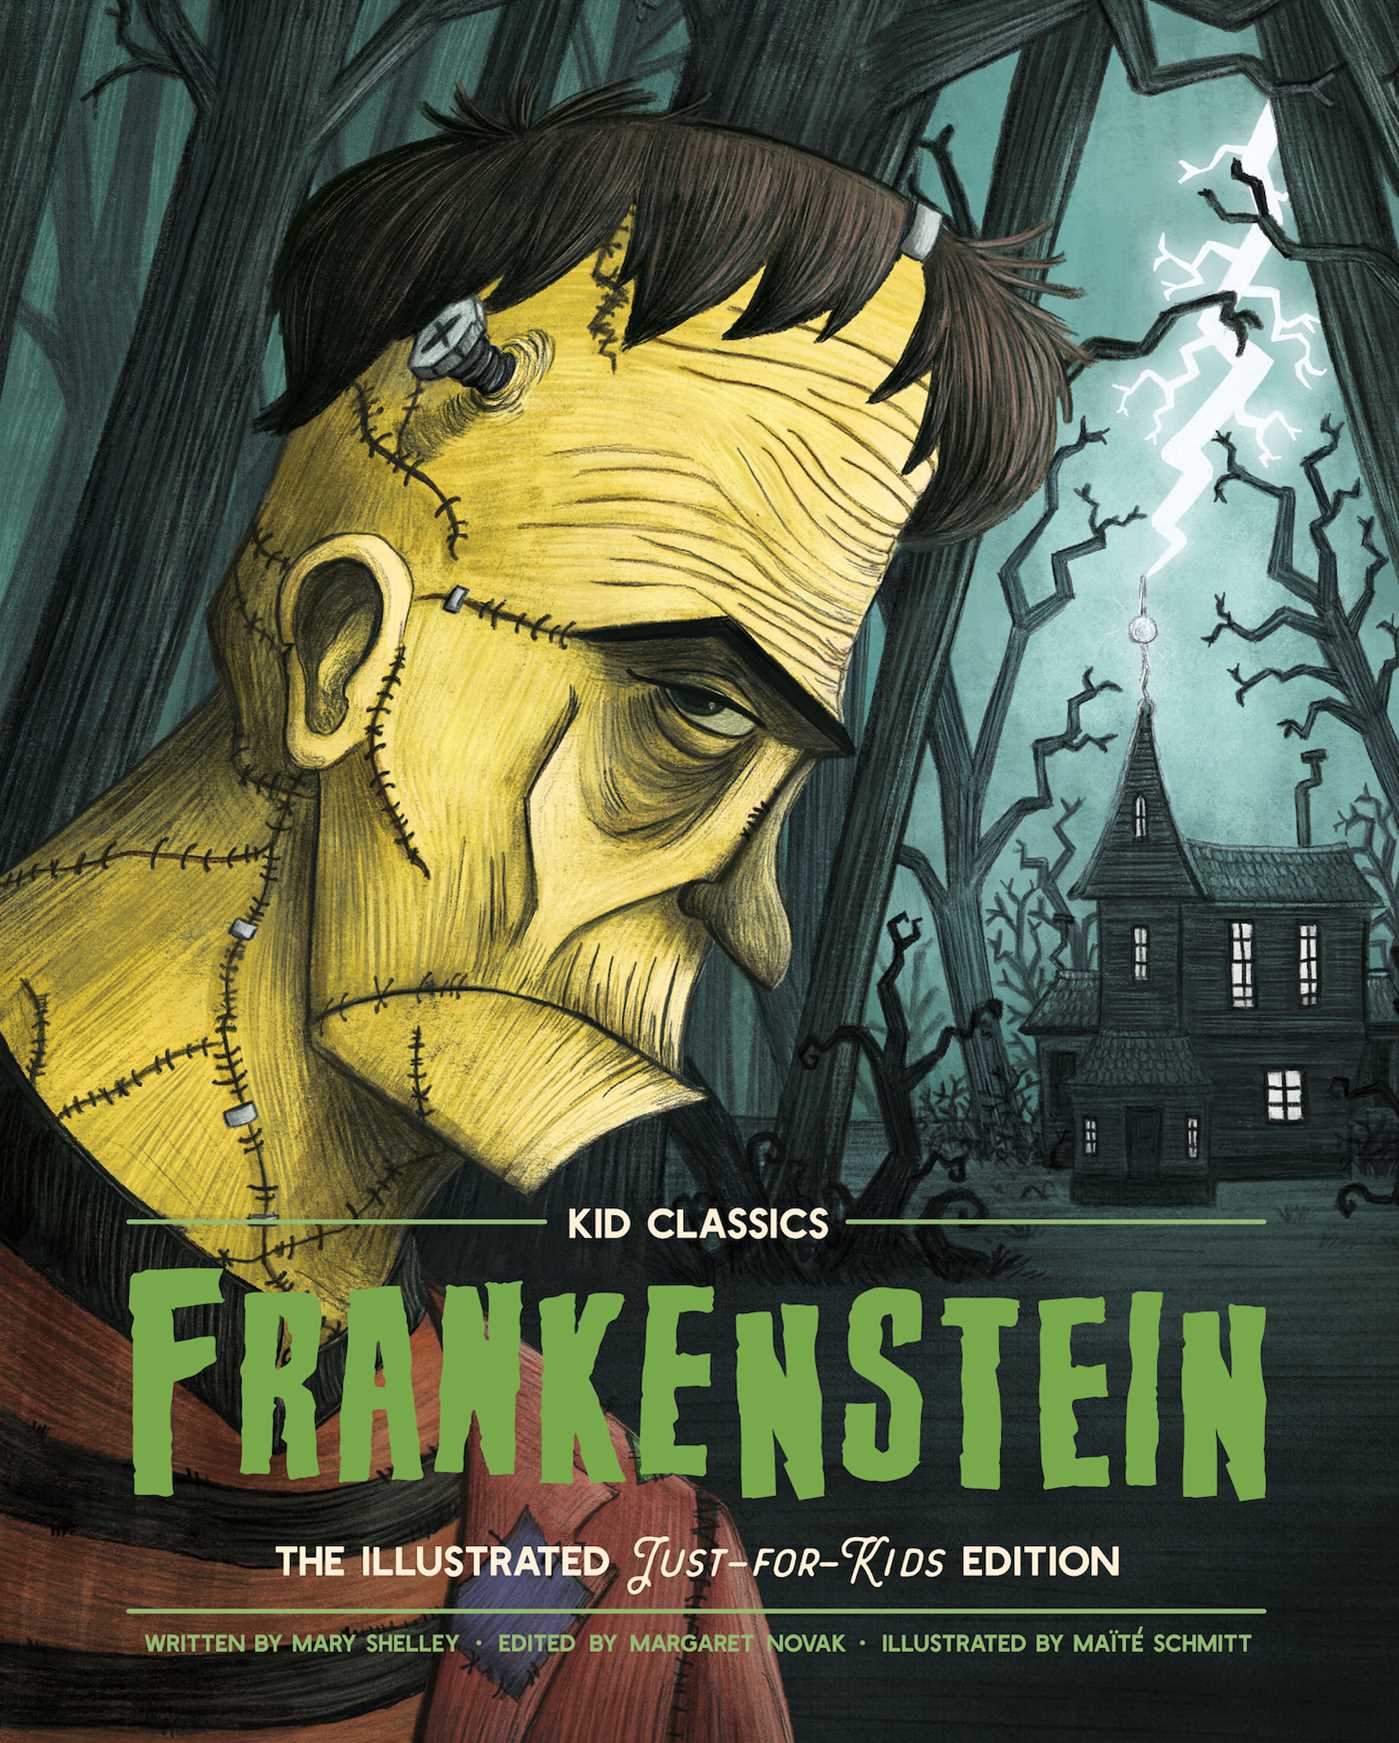 Frankenstein - Kid Classics : The Classic Edition Reimagined Just-for-Kids! (Kid Classic #2)